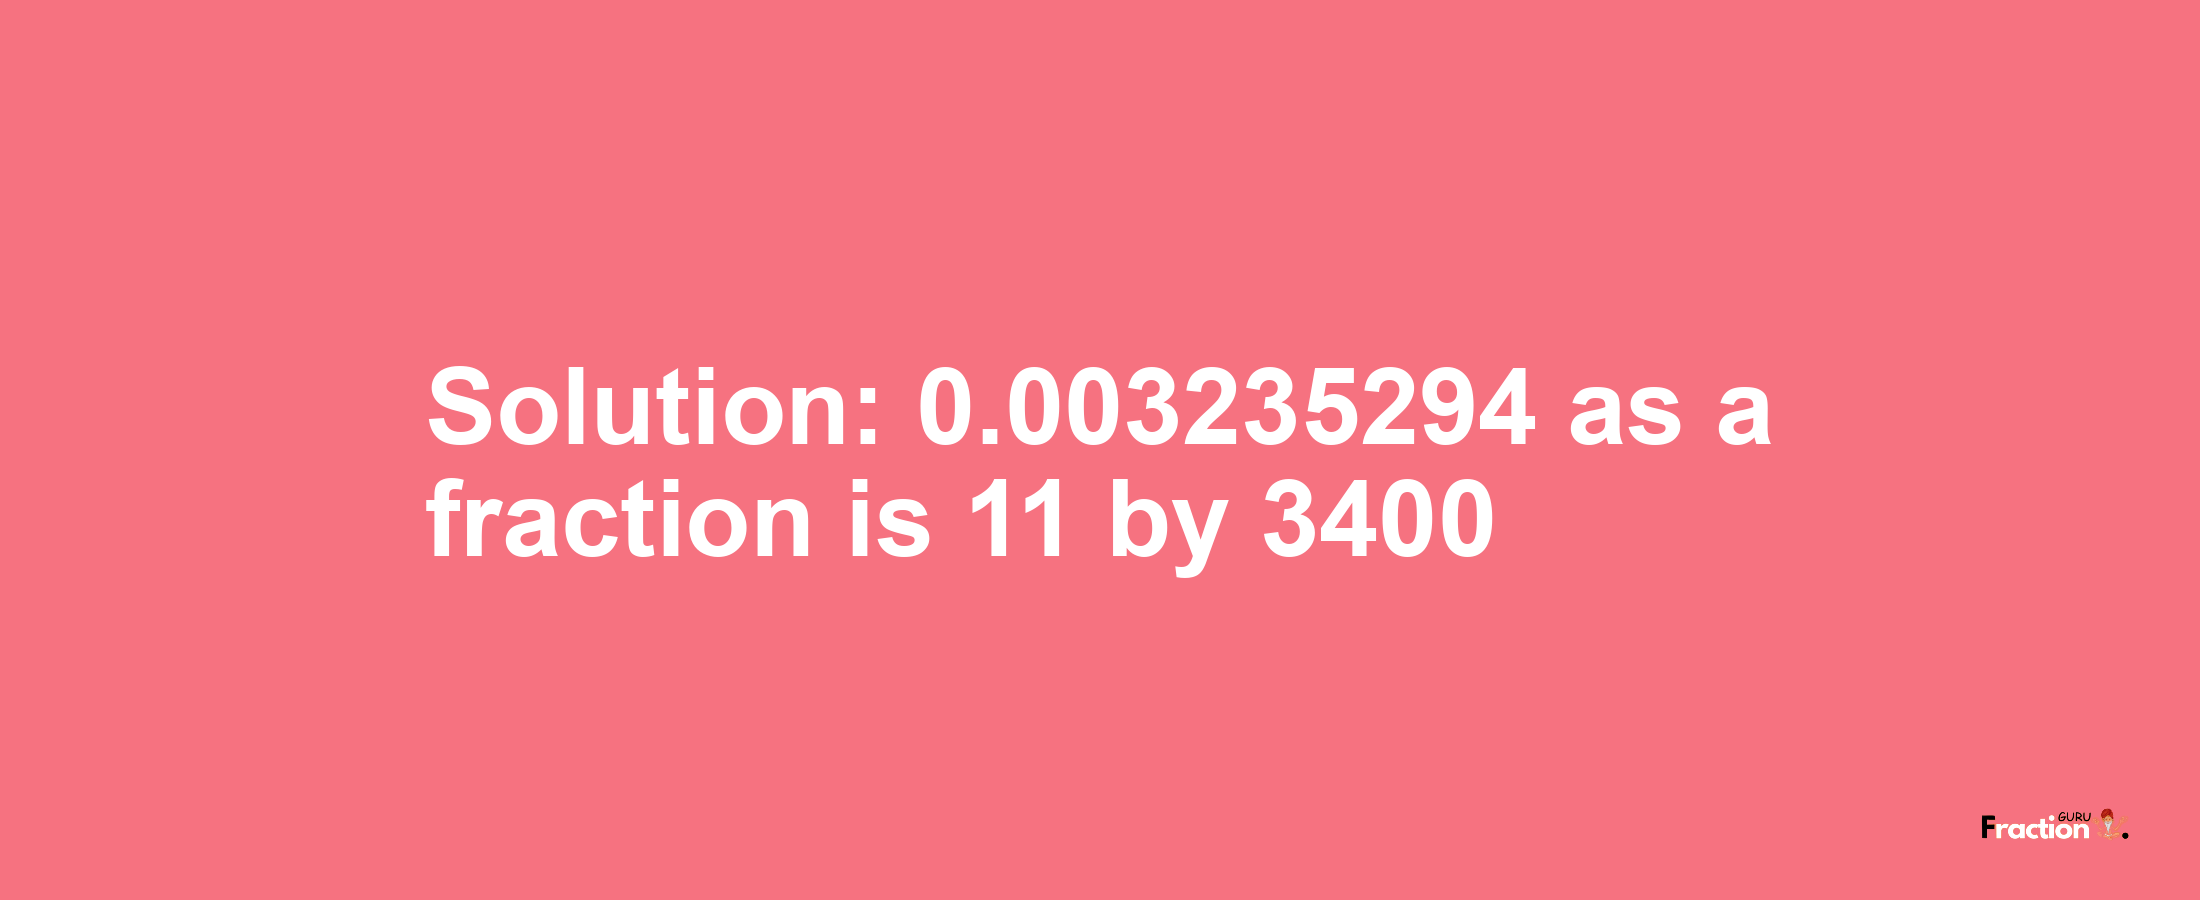 Solution:0.003235294 as a fraction is 11/3400